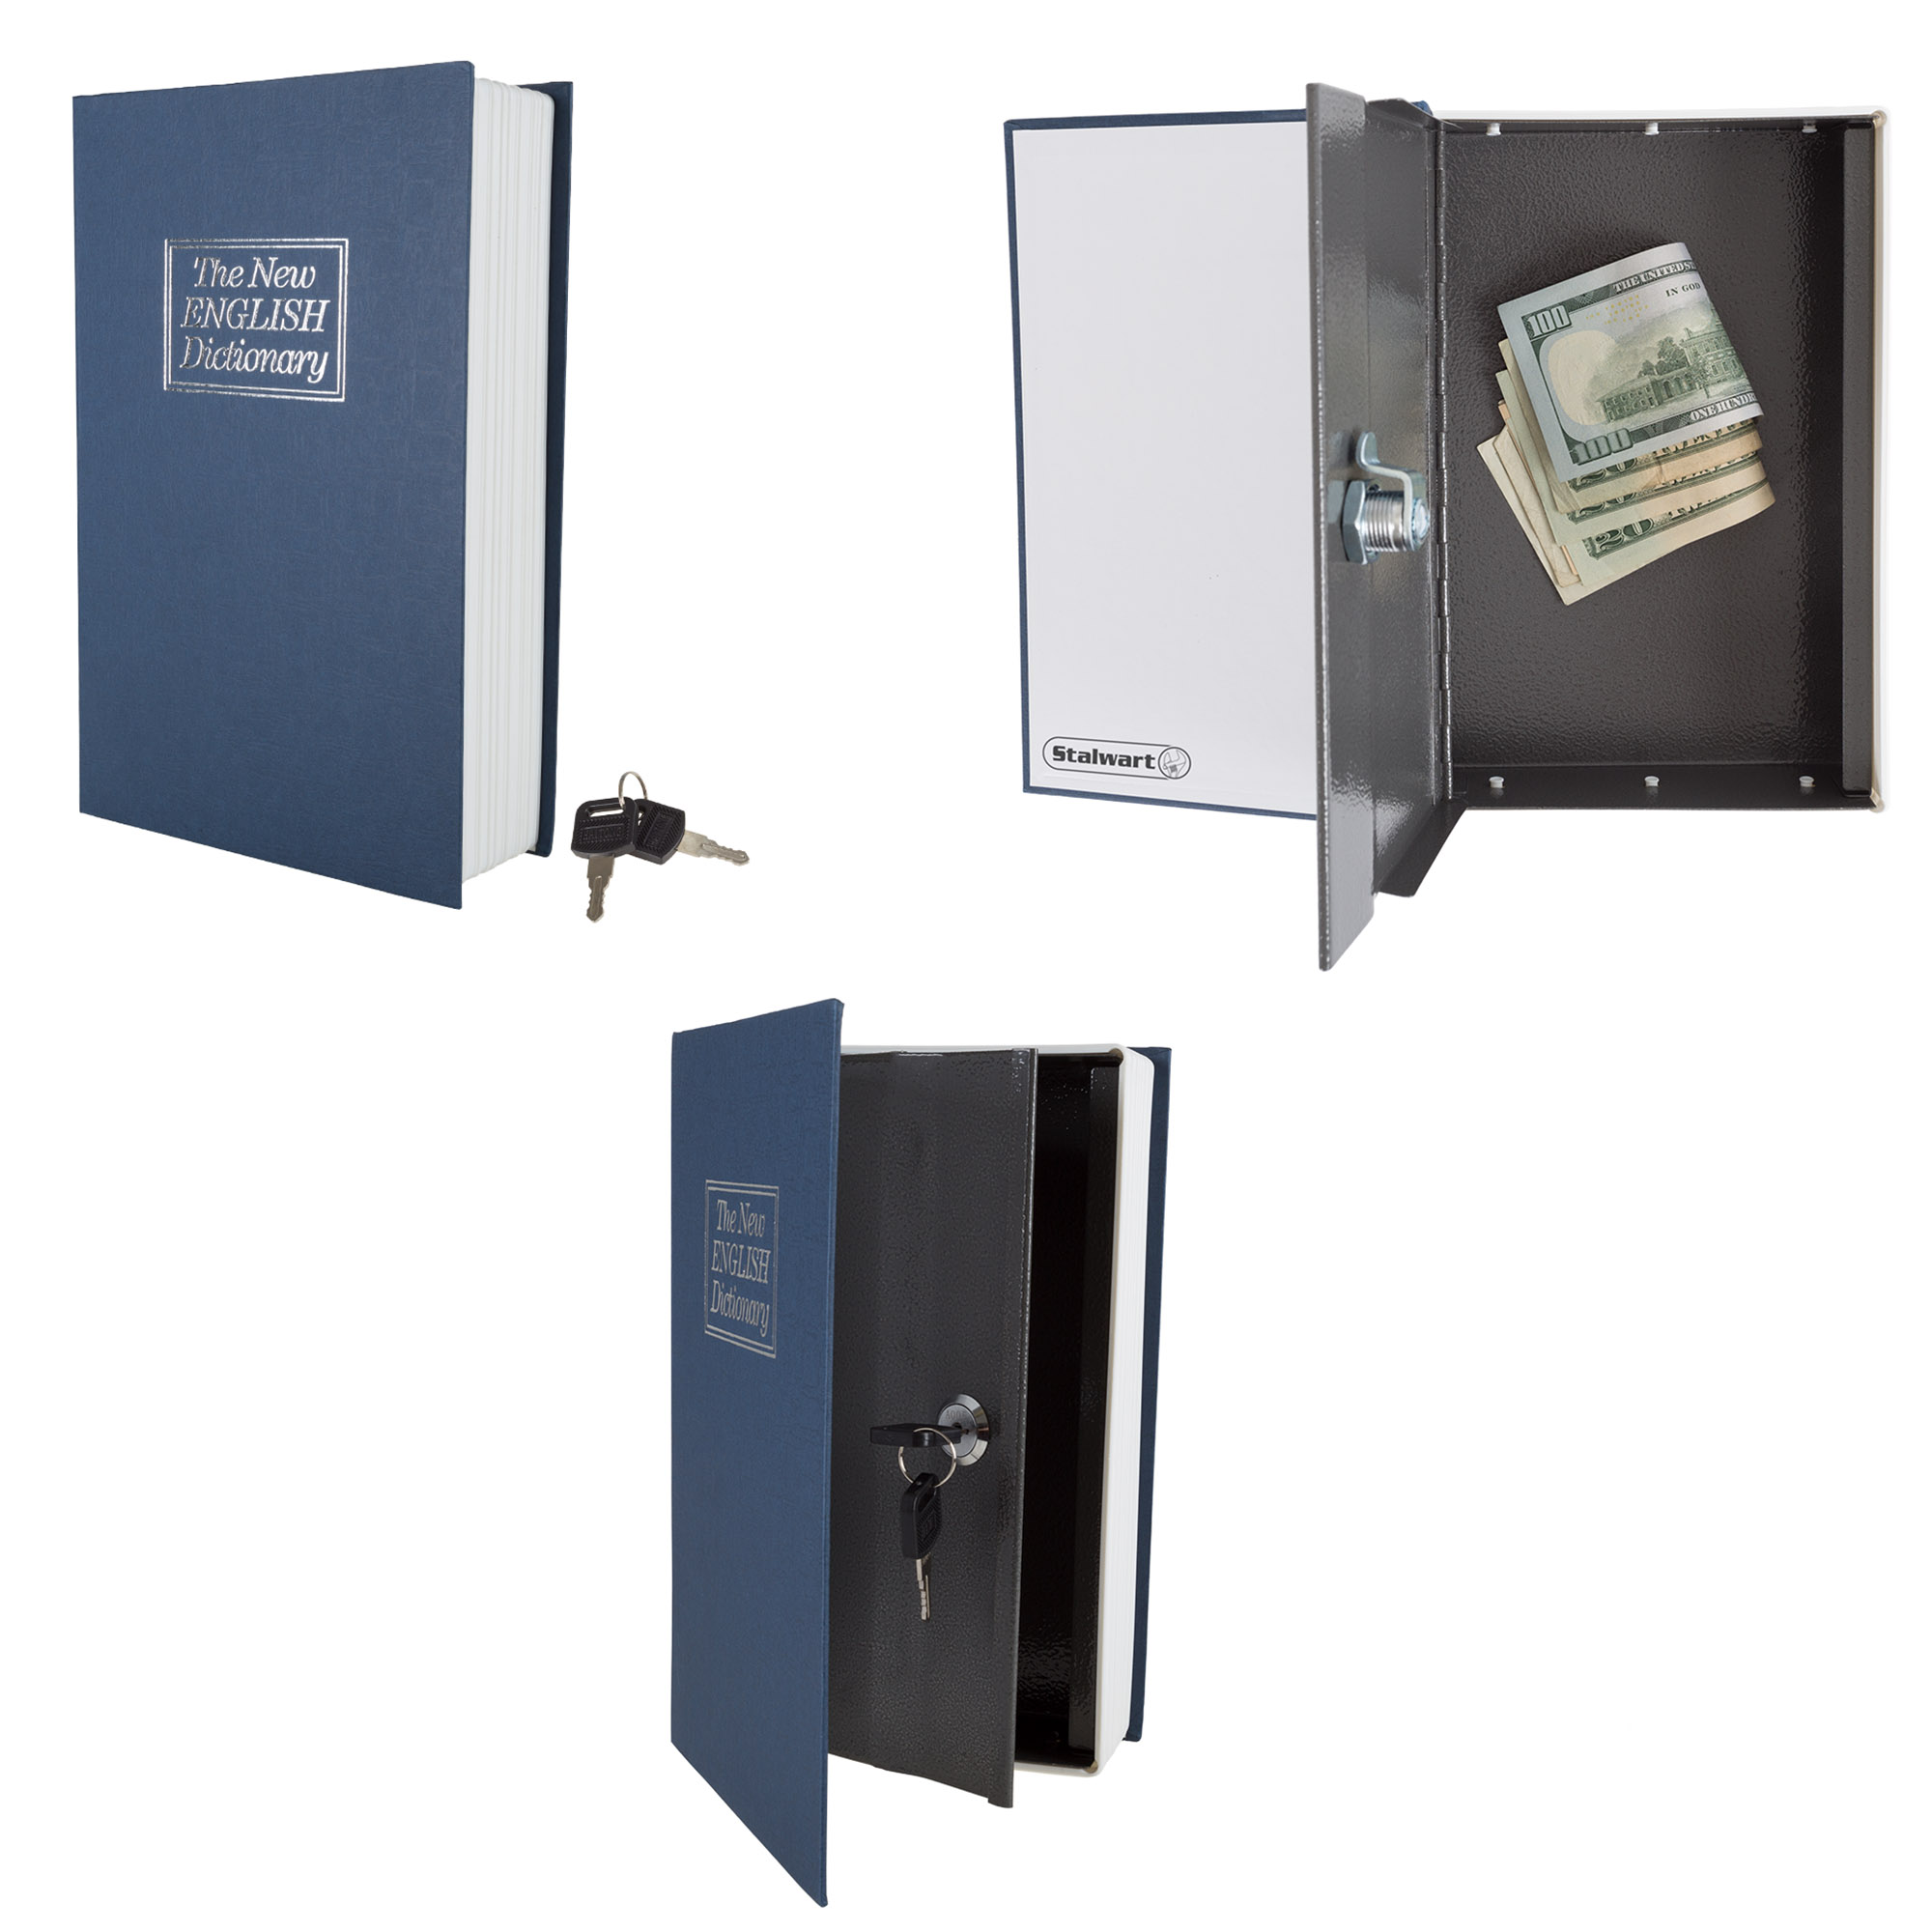 STALWART Diversion Metal Book Safe with Lock and 2 Keys – Portable New English Dictionary Faux Book Lock Box Safe for Cash, Jewelry, Passport and Other Valuables (Blue) - image 3 of 5